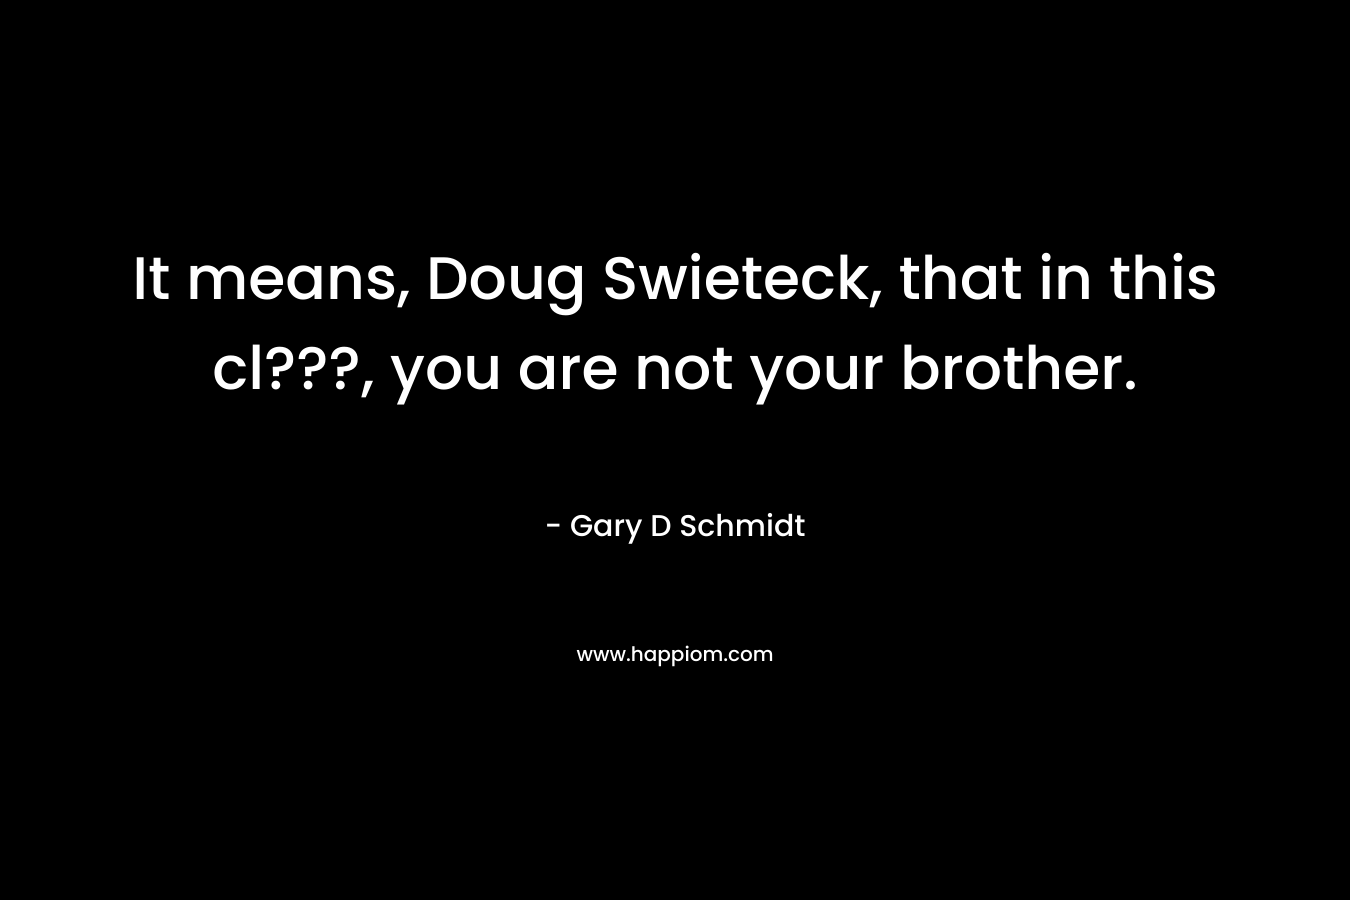 It means, Doug Swieteck, that in this cl???, you are not your brother.